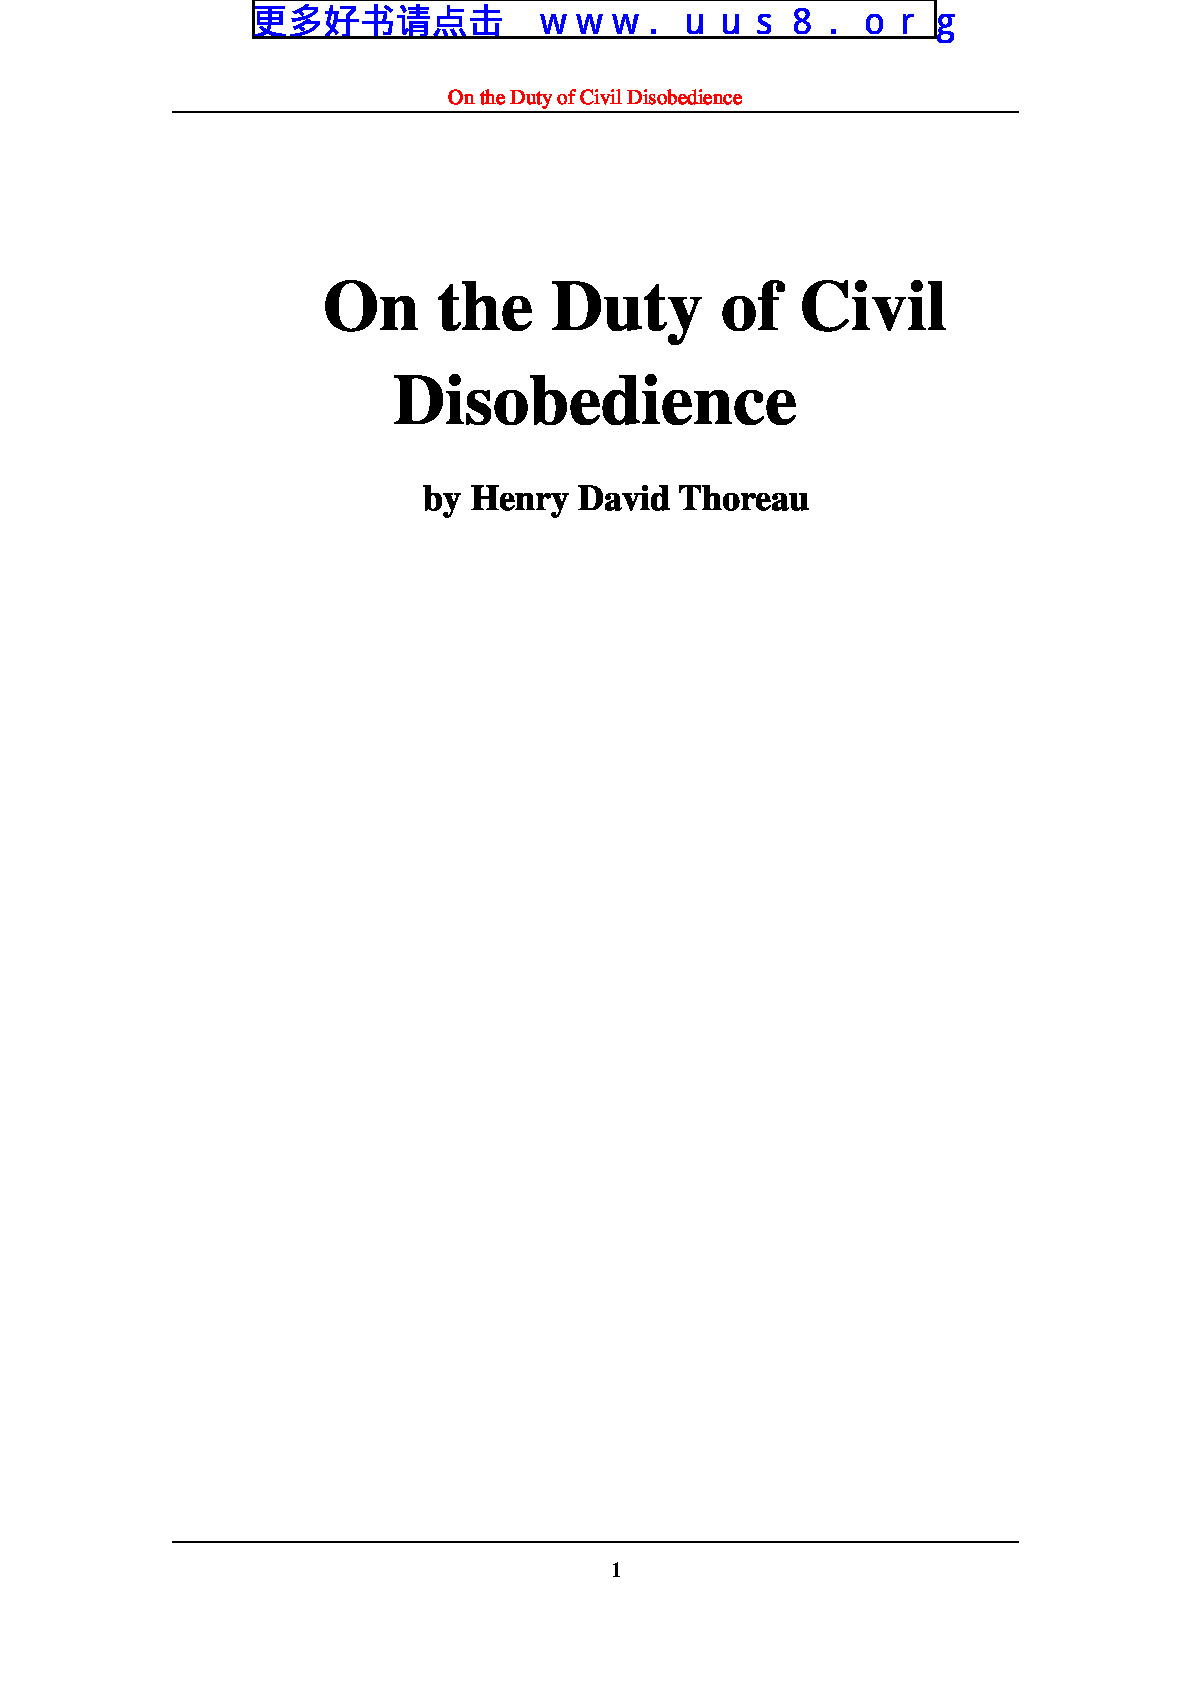 On_the_Duty_of_Civil_Disobedience(论公民的不服从) – 副本